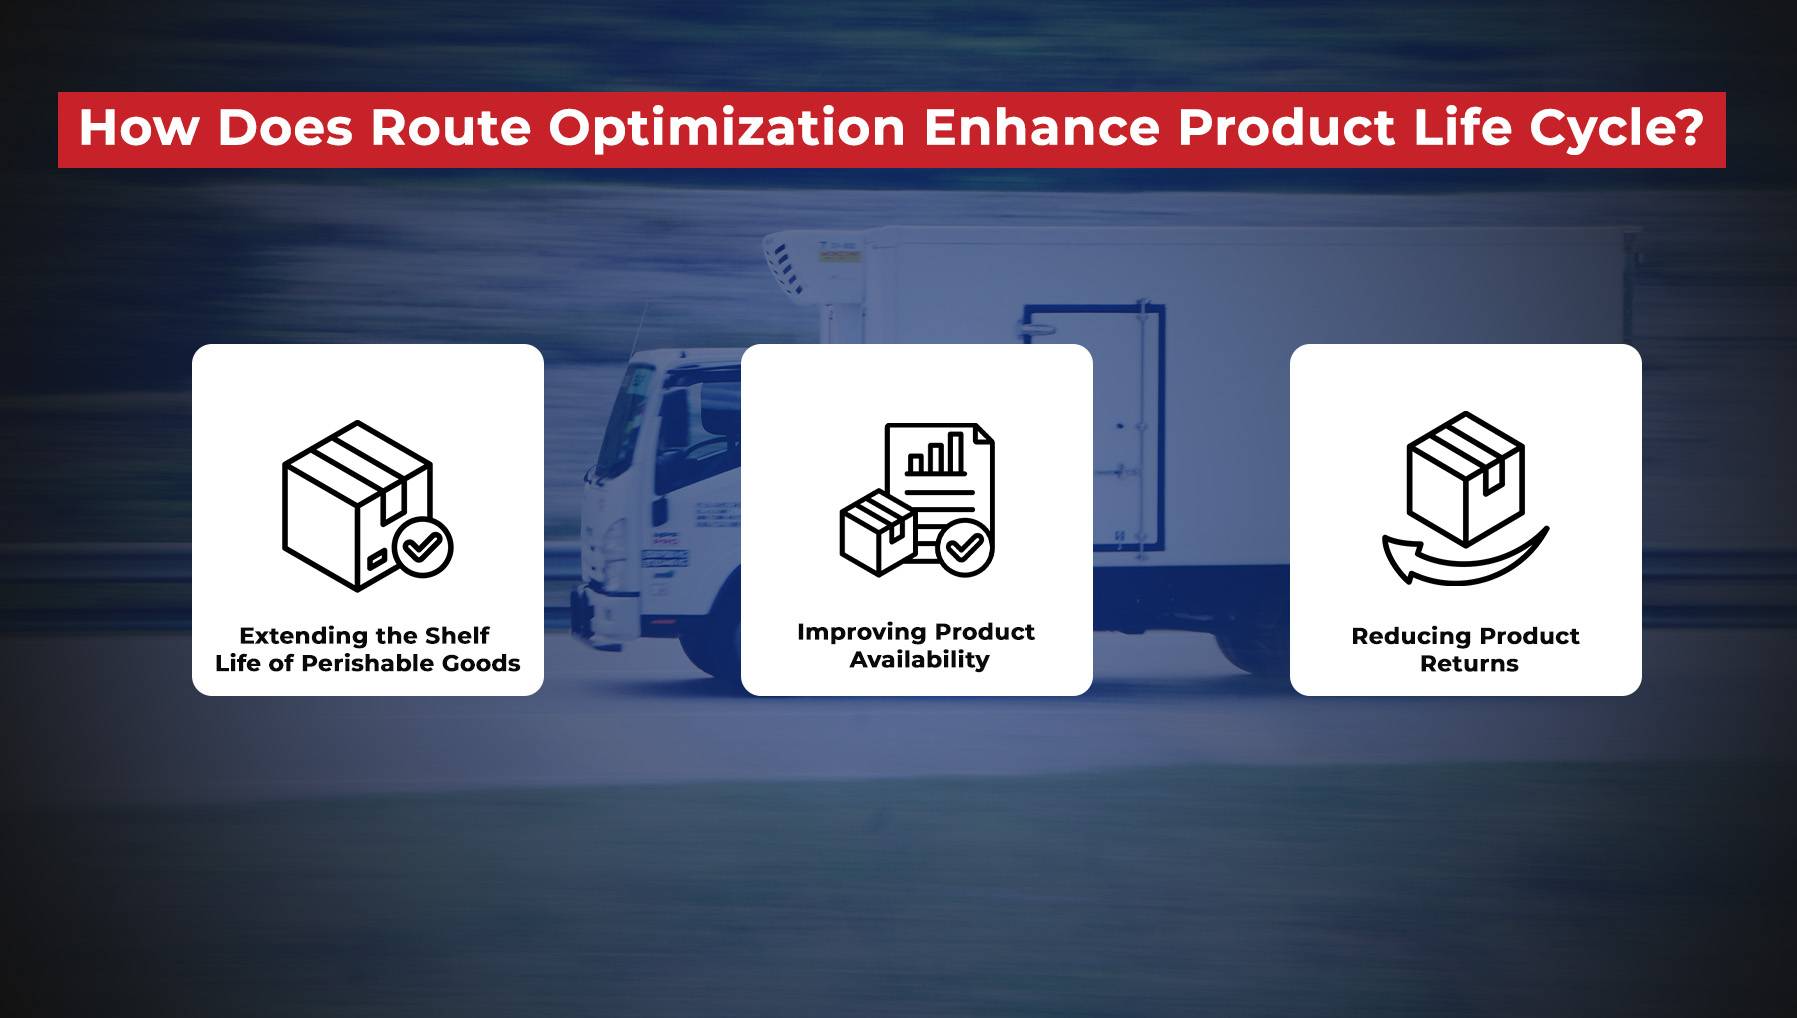 How route optimization improves product life cycle?